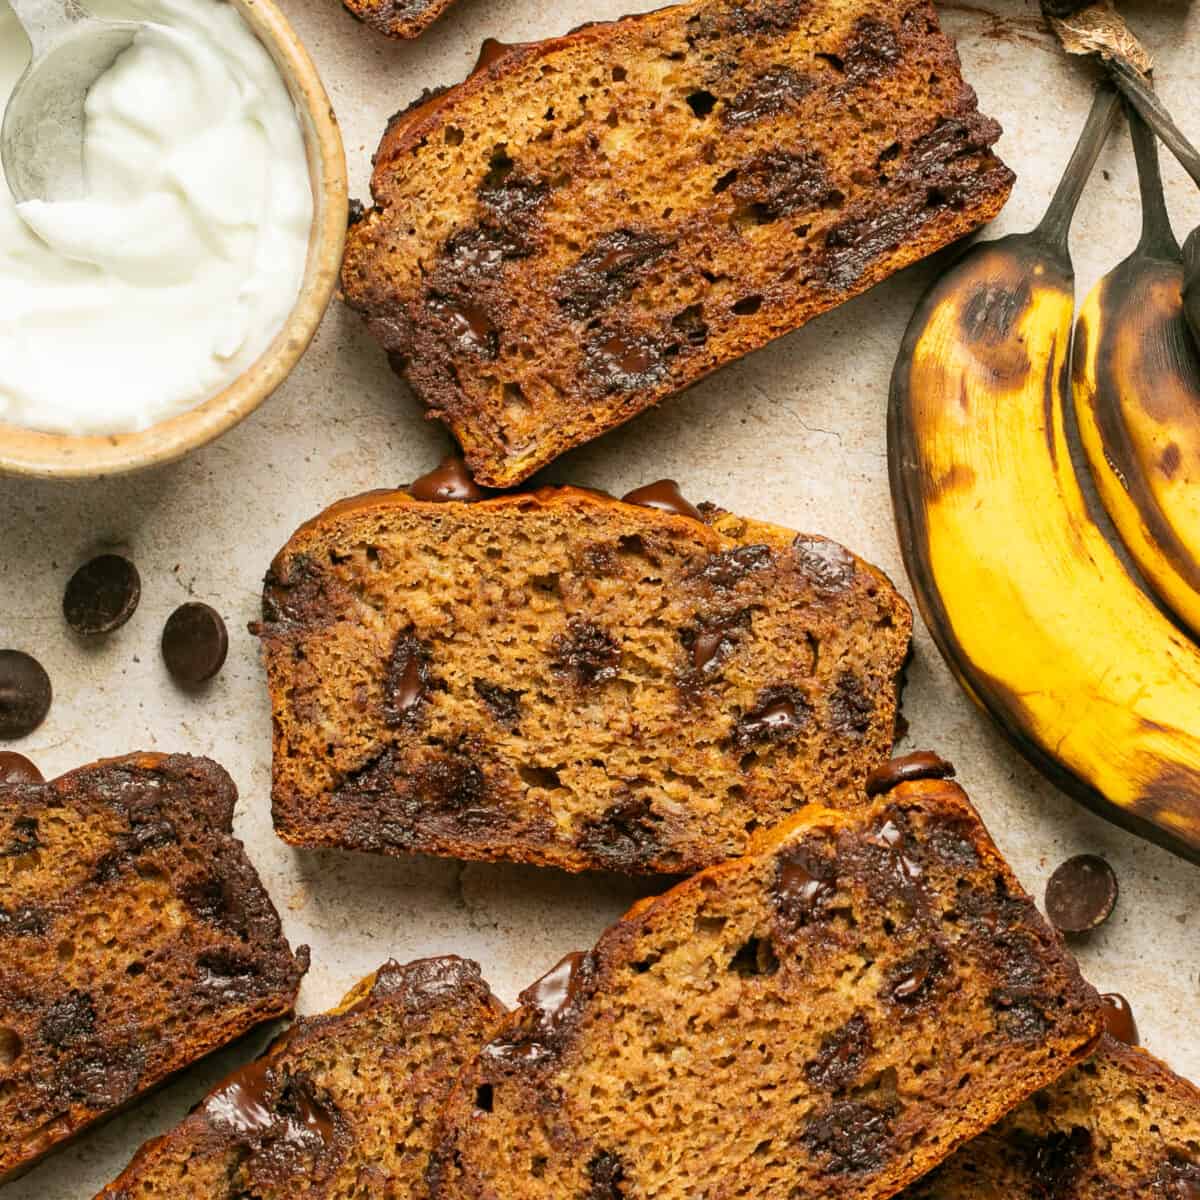 Sliced banana bread with chocolate chips laid out with a small bowl of greek yogurt and a ripe banana.